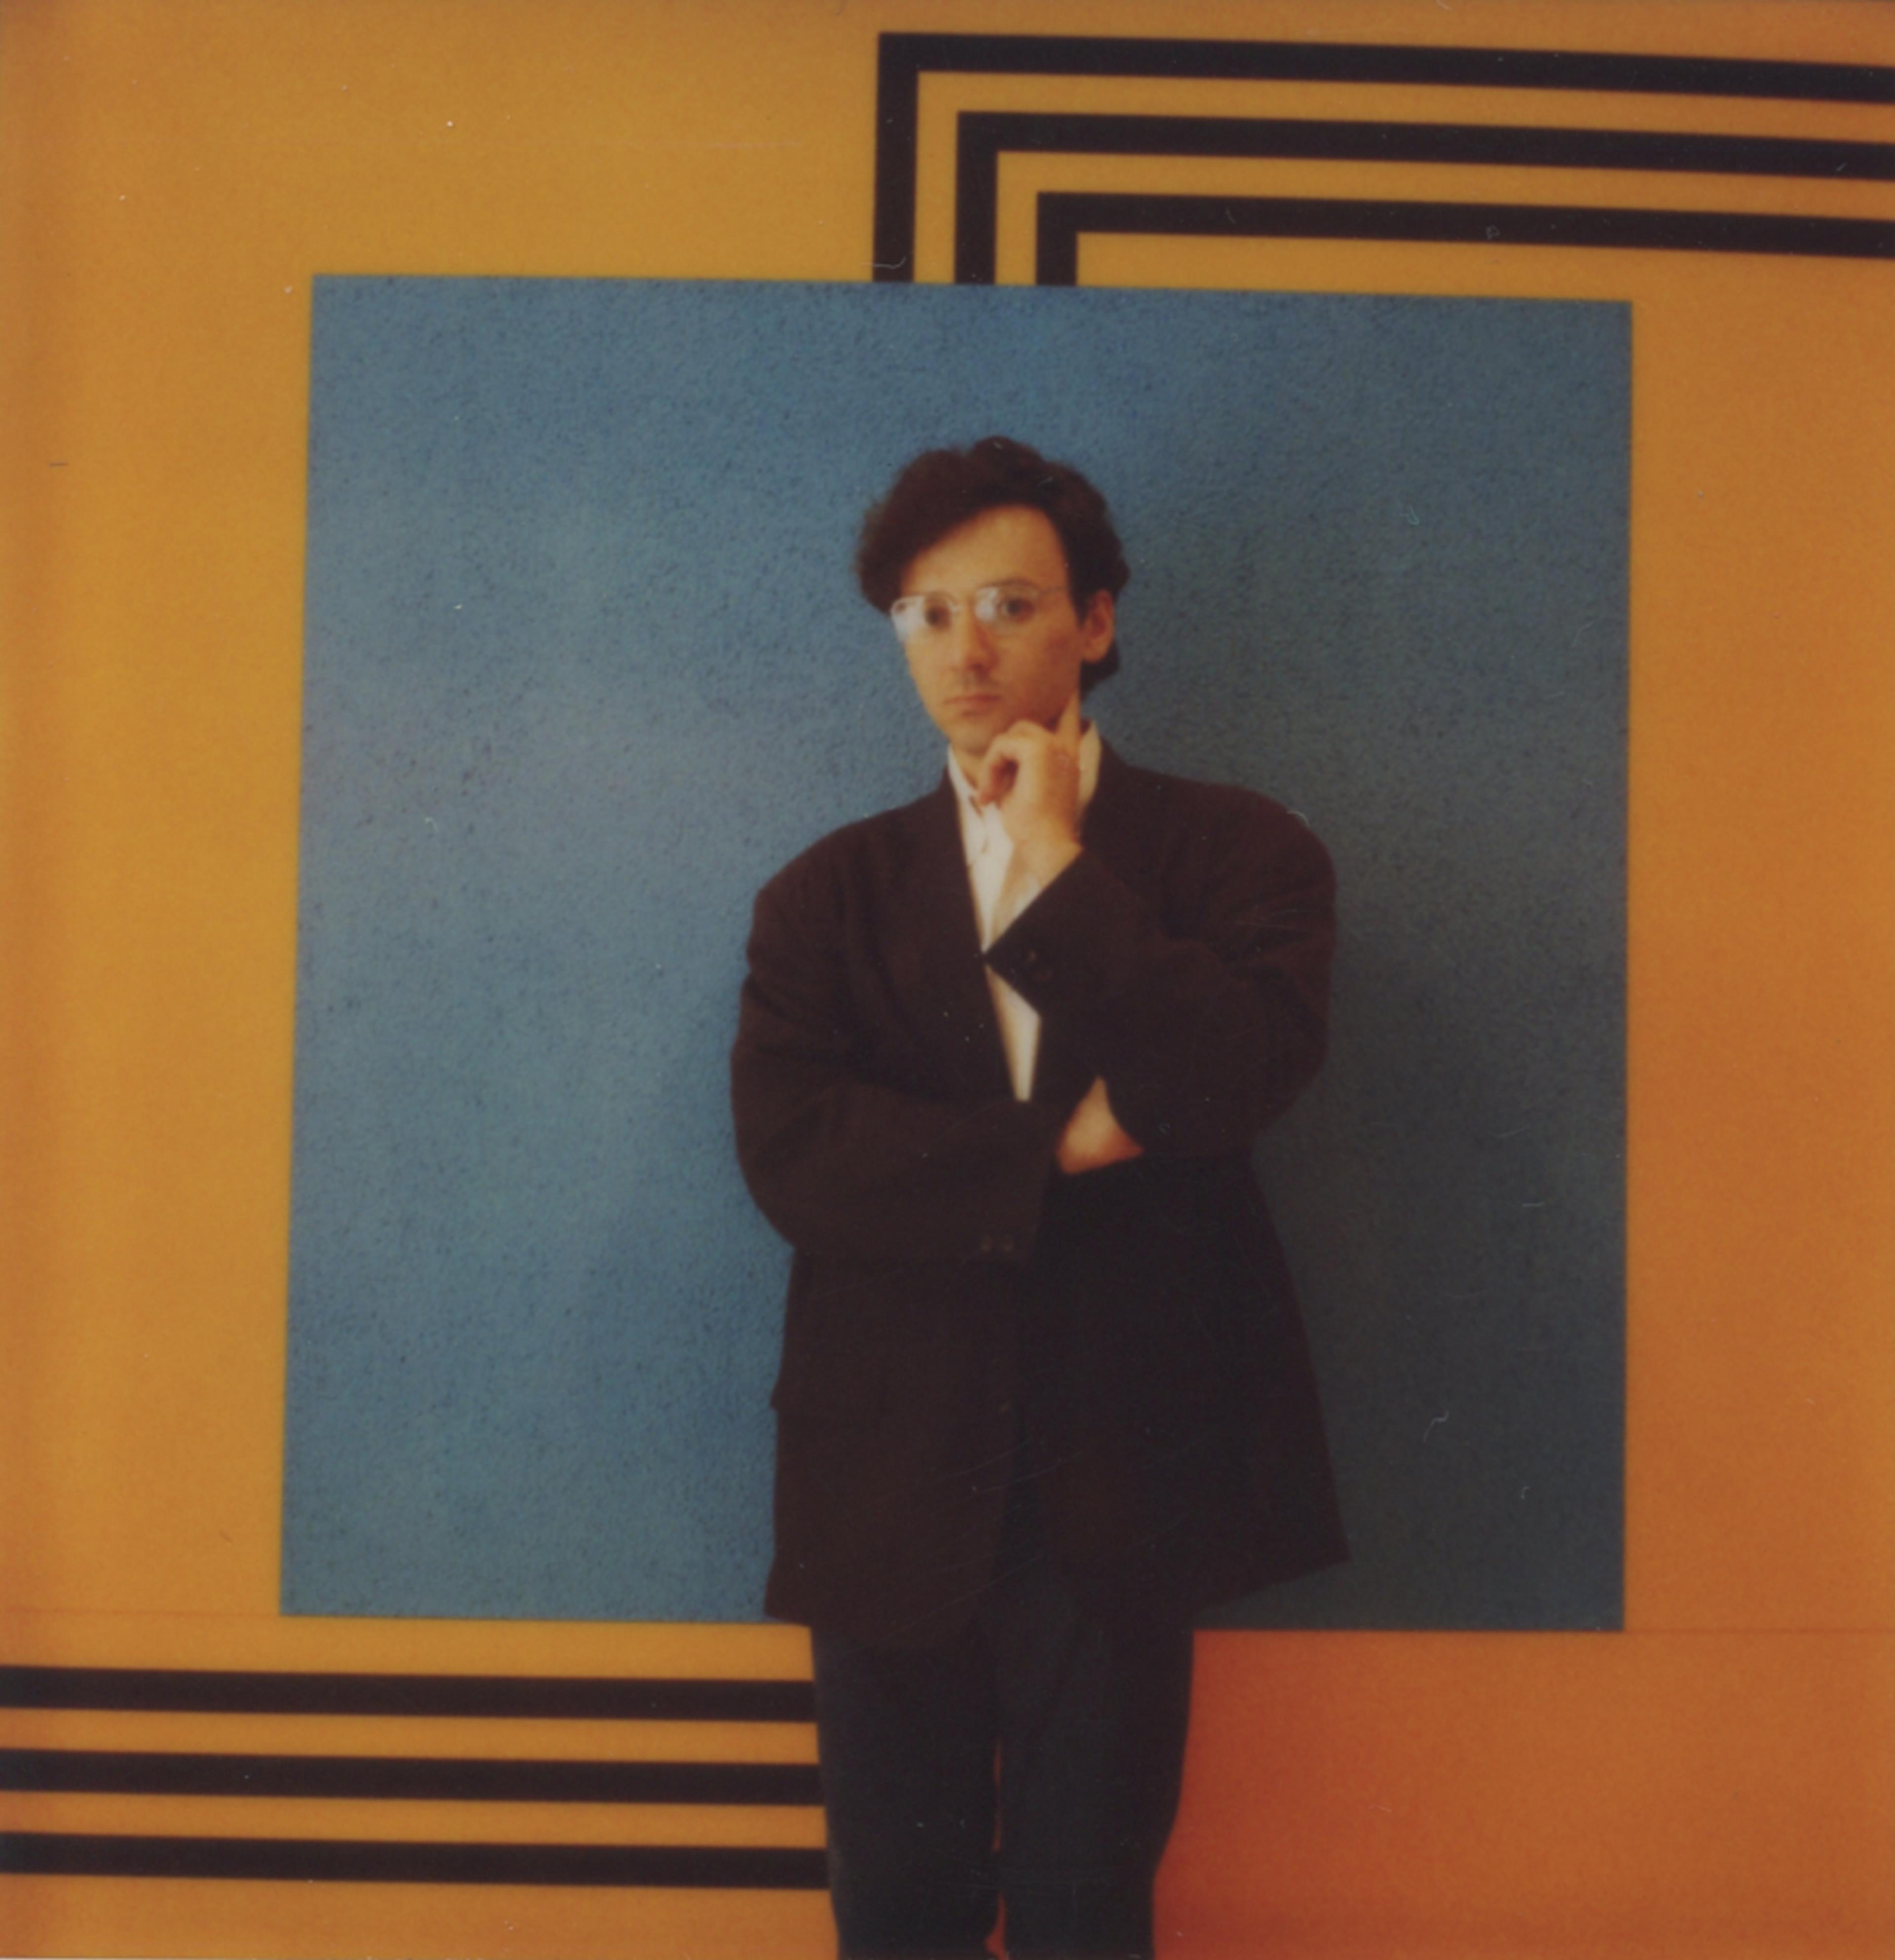 Portrait of Peter Halley in front of Blue Cell with Triple Conduit 3, Polaroid, 1986